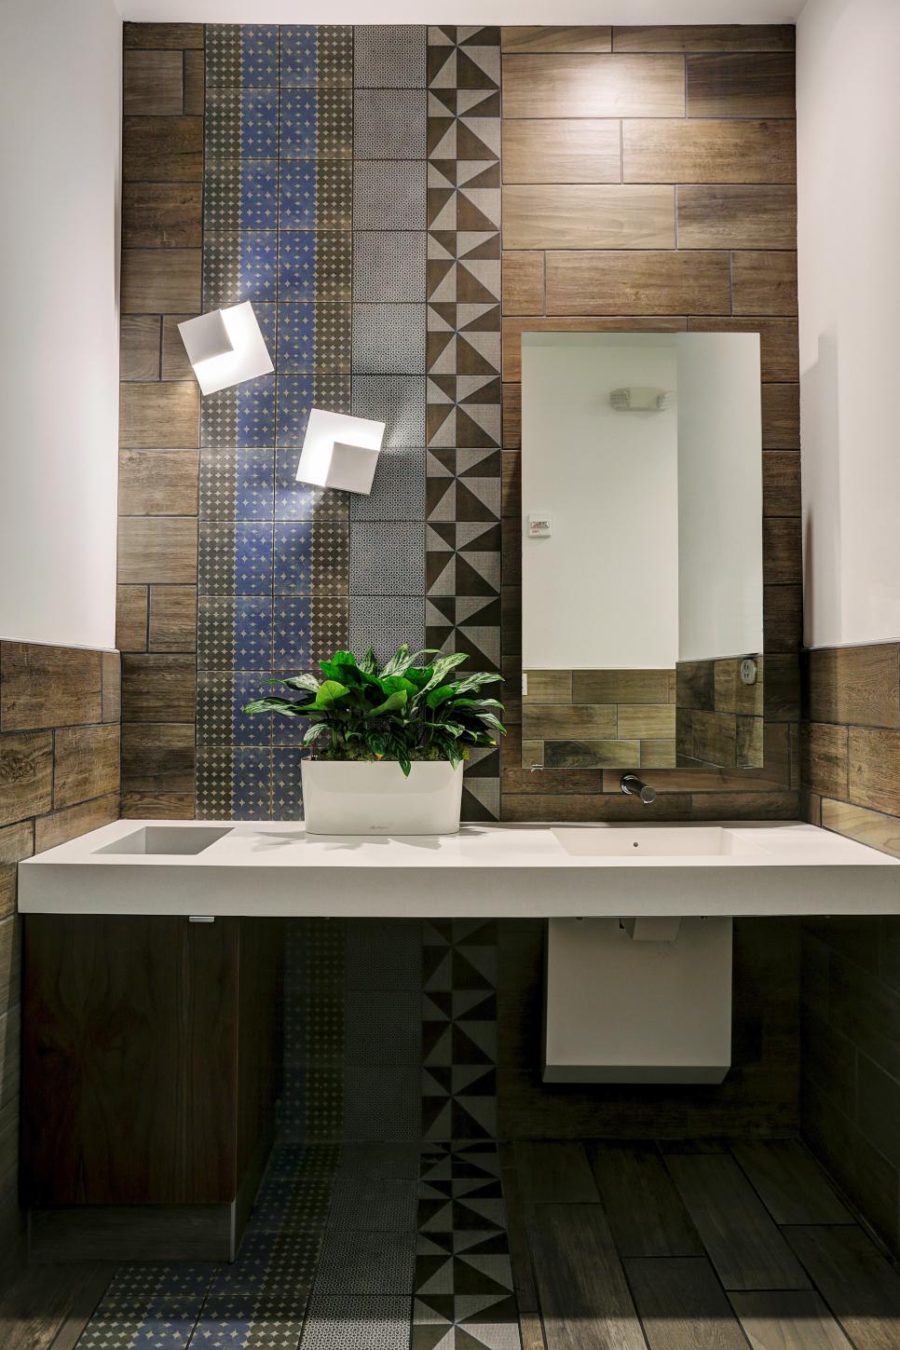 Bathroom accent wall in wood look tiles by Gin Braverman